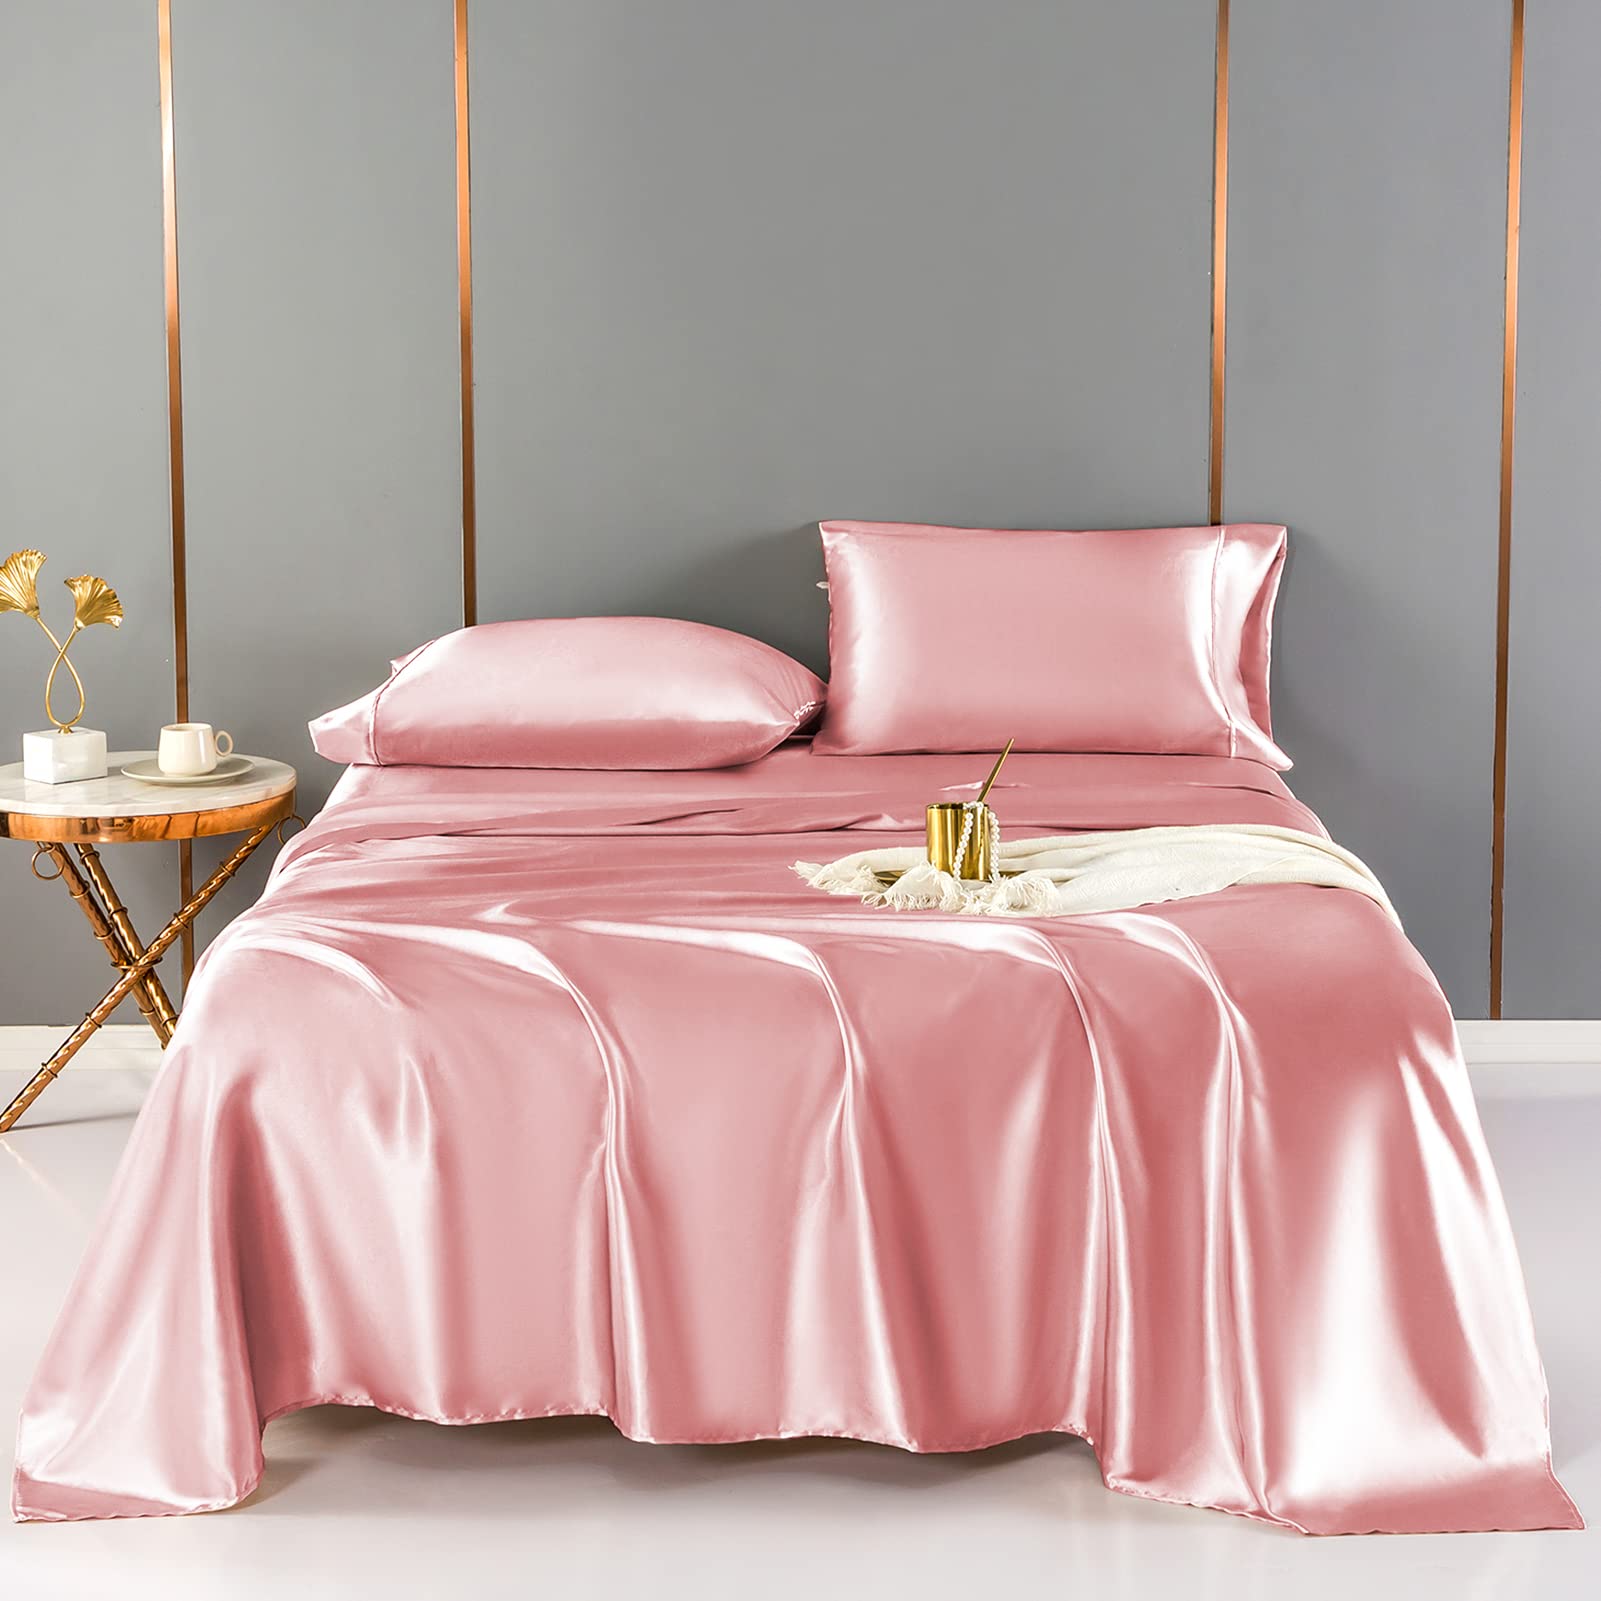 HENgWEITEXT Pink Satin Sheets - 4 Pcs HENgWEI Queen Size Silky Bed Sheet Soft Luxury Satin Sheet,Wrinkle-Free,Stain Resistant Bed Satin Shee